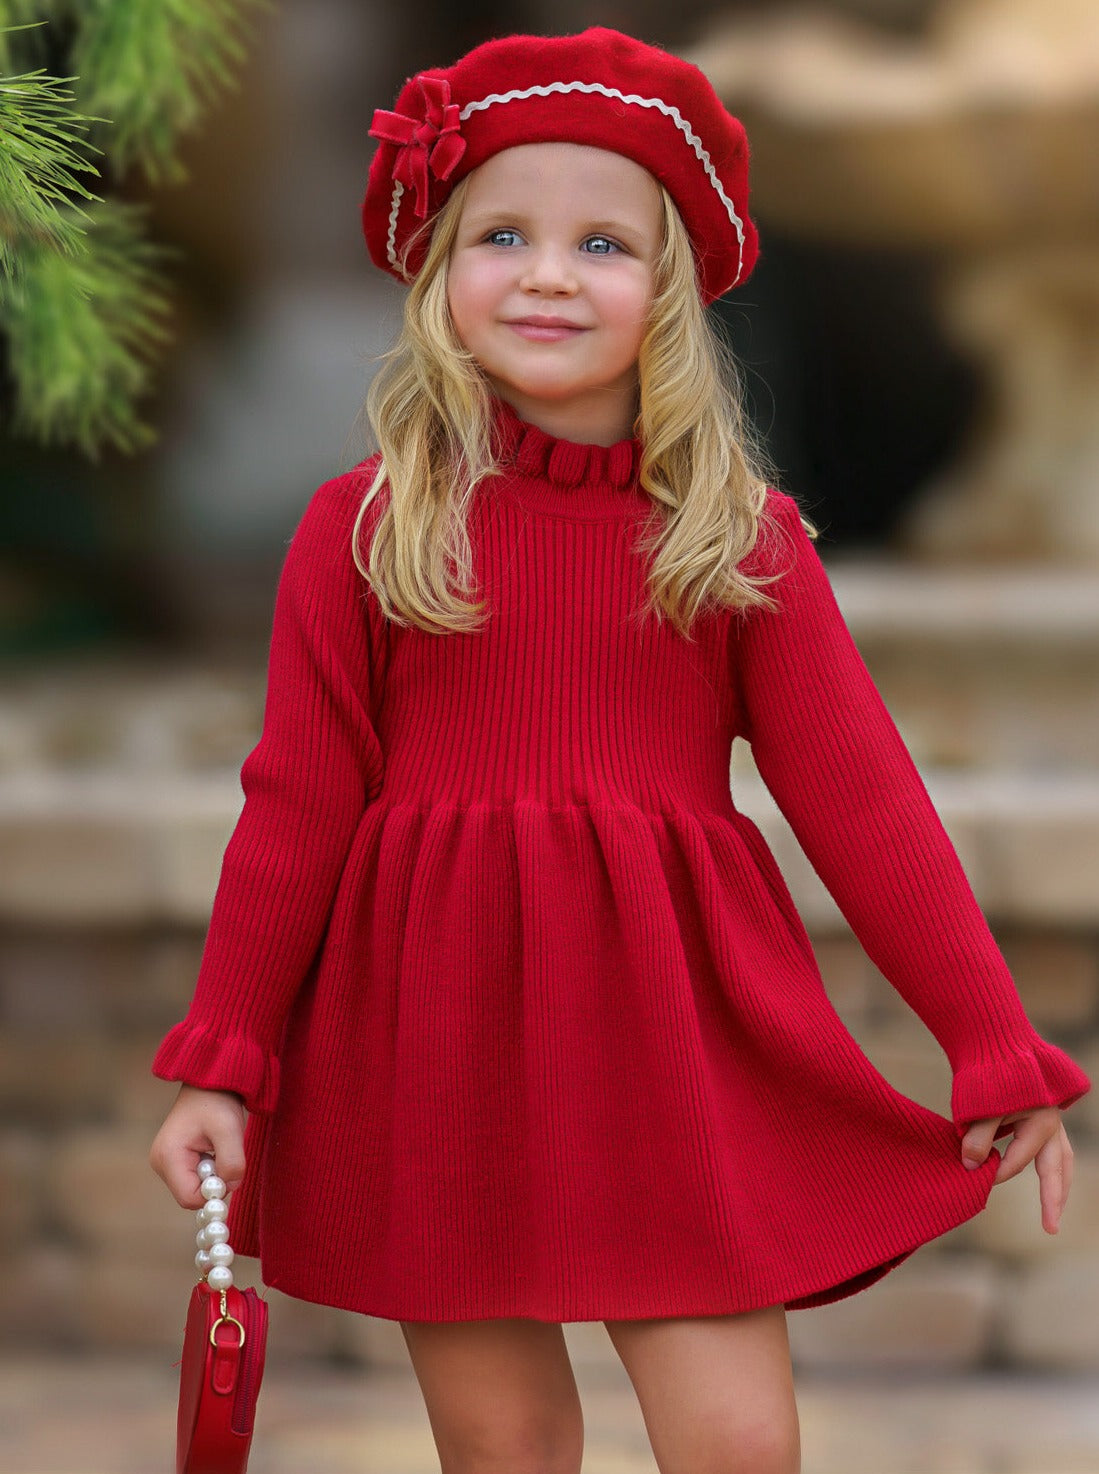 Cozy Bear Leader Knitted Infant Princess Dress For Girls Autumn/Winter  Party Sweater, Ideal For Christmas Costume Size 48Y Baby Girl Clothes  231030 From Niao08, $11.56 | DHgate.Com